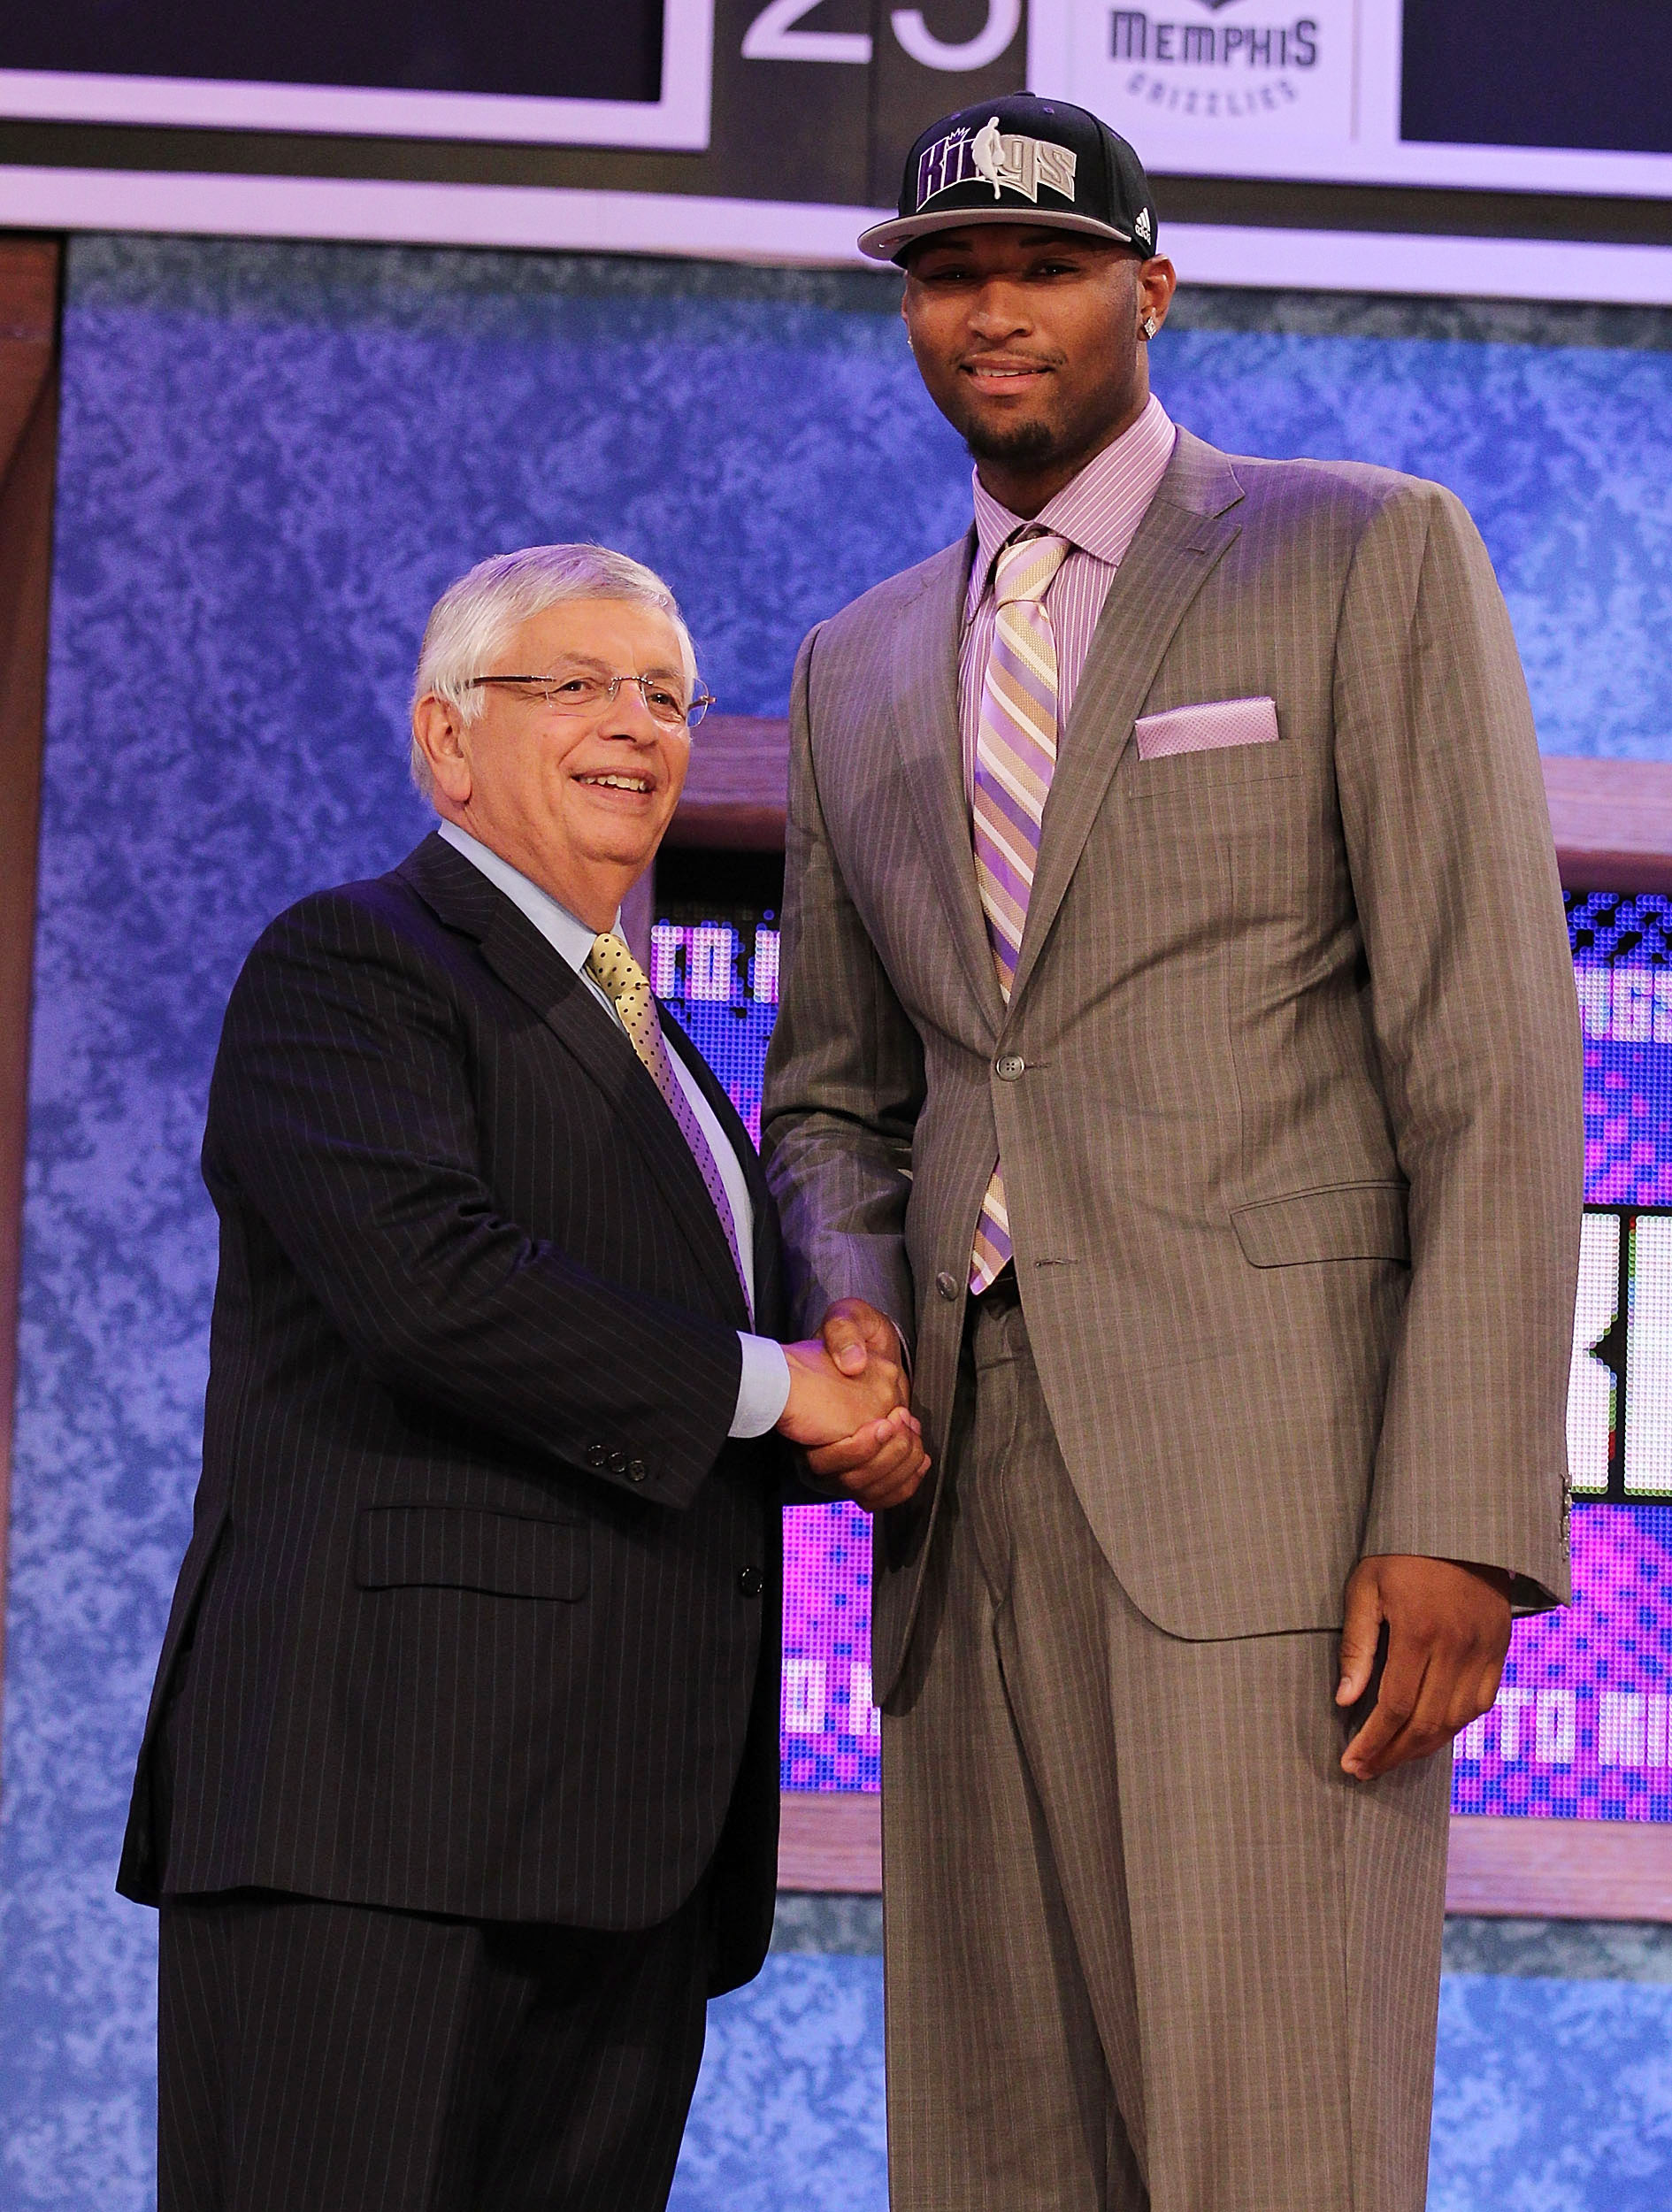 NEW YORK - JUNE 24:  DeMarcus Cousins stands with NBA Commisioner David Stern after being drafted fifth by  The Sacramento Kings at Madison Square Garden on June 24, 2010 in New York City.  NOTE TO USER: User expressly acknowledges and agrees that, by dow